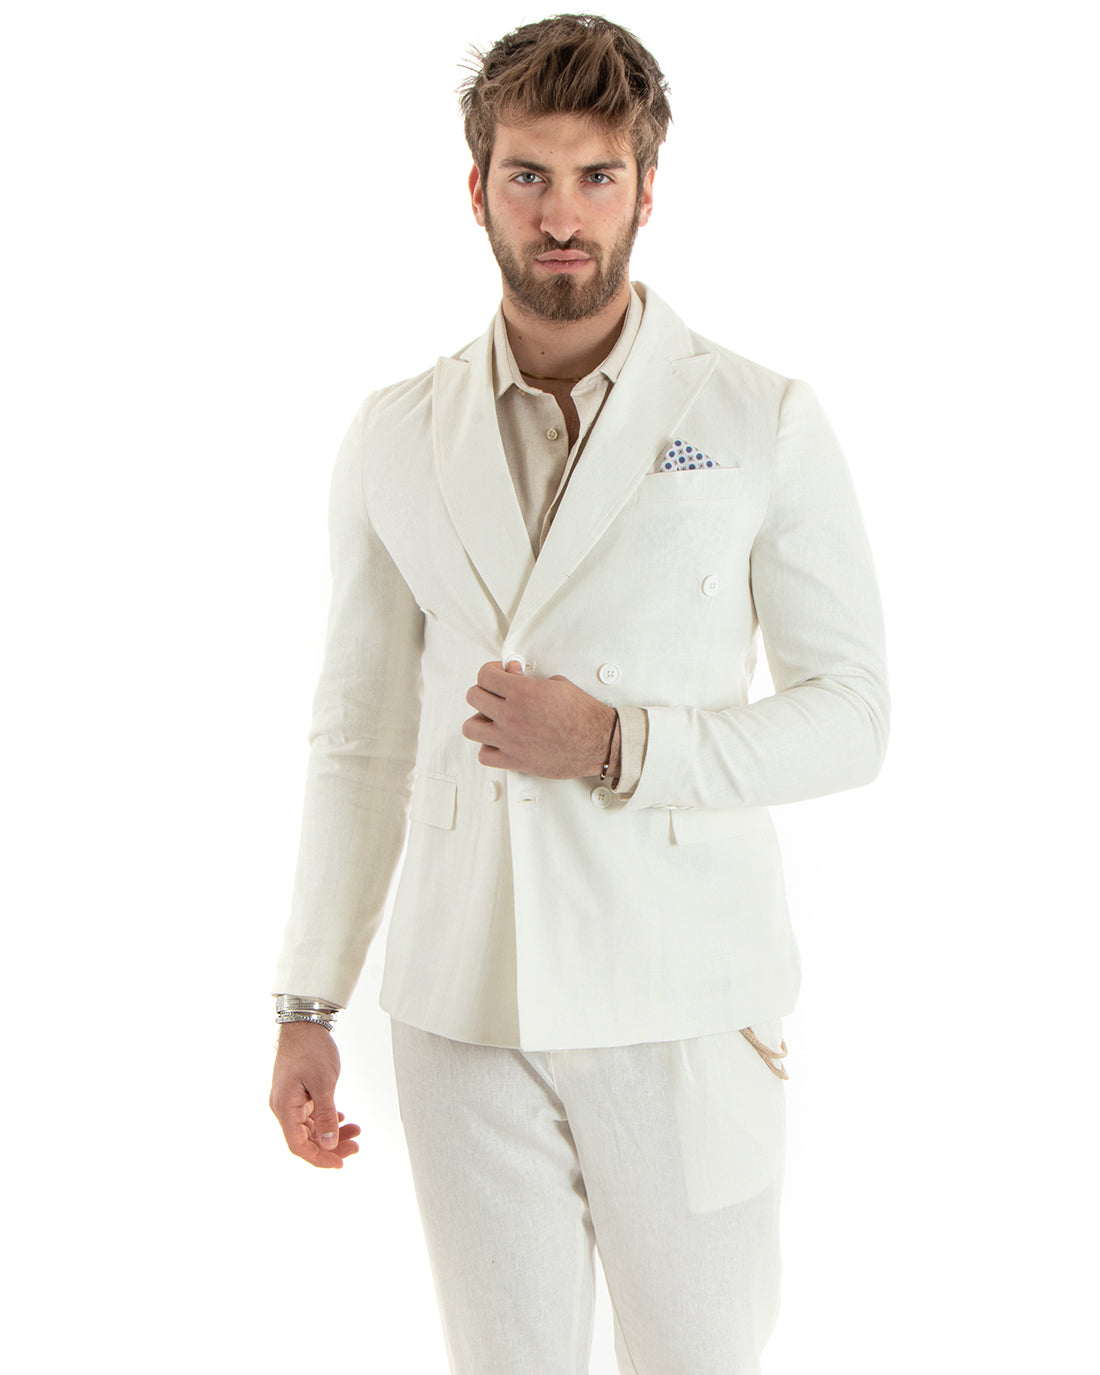 Double-Breasted Men's Suit Tailored Linen Suit Jacket Trousers Solid Color Cream GIOSAL-OU2333A